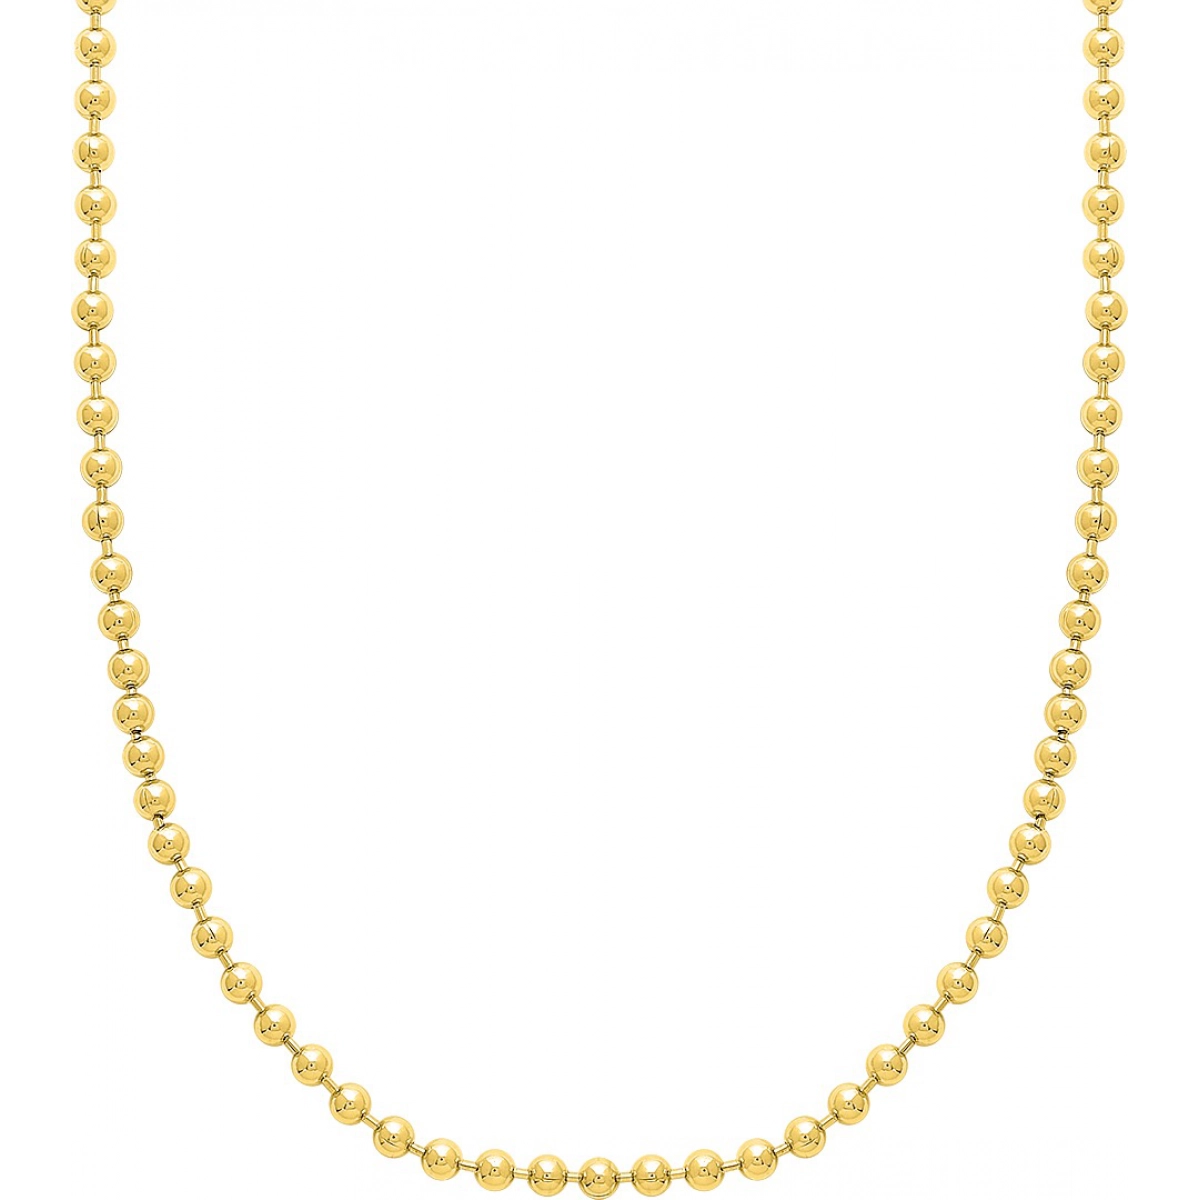 Hollow chain gold plated Brass Lua Blanca  254586J - Size 45